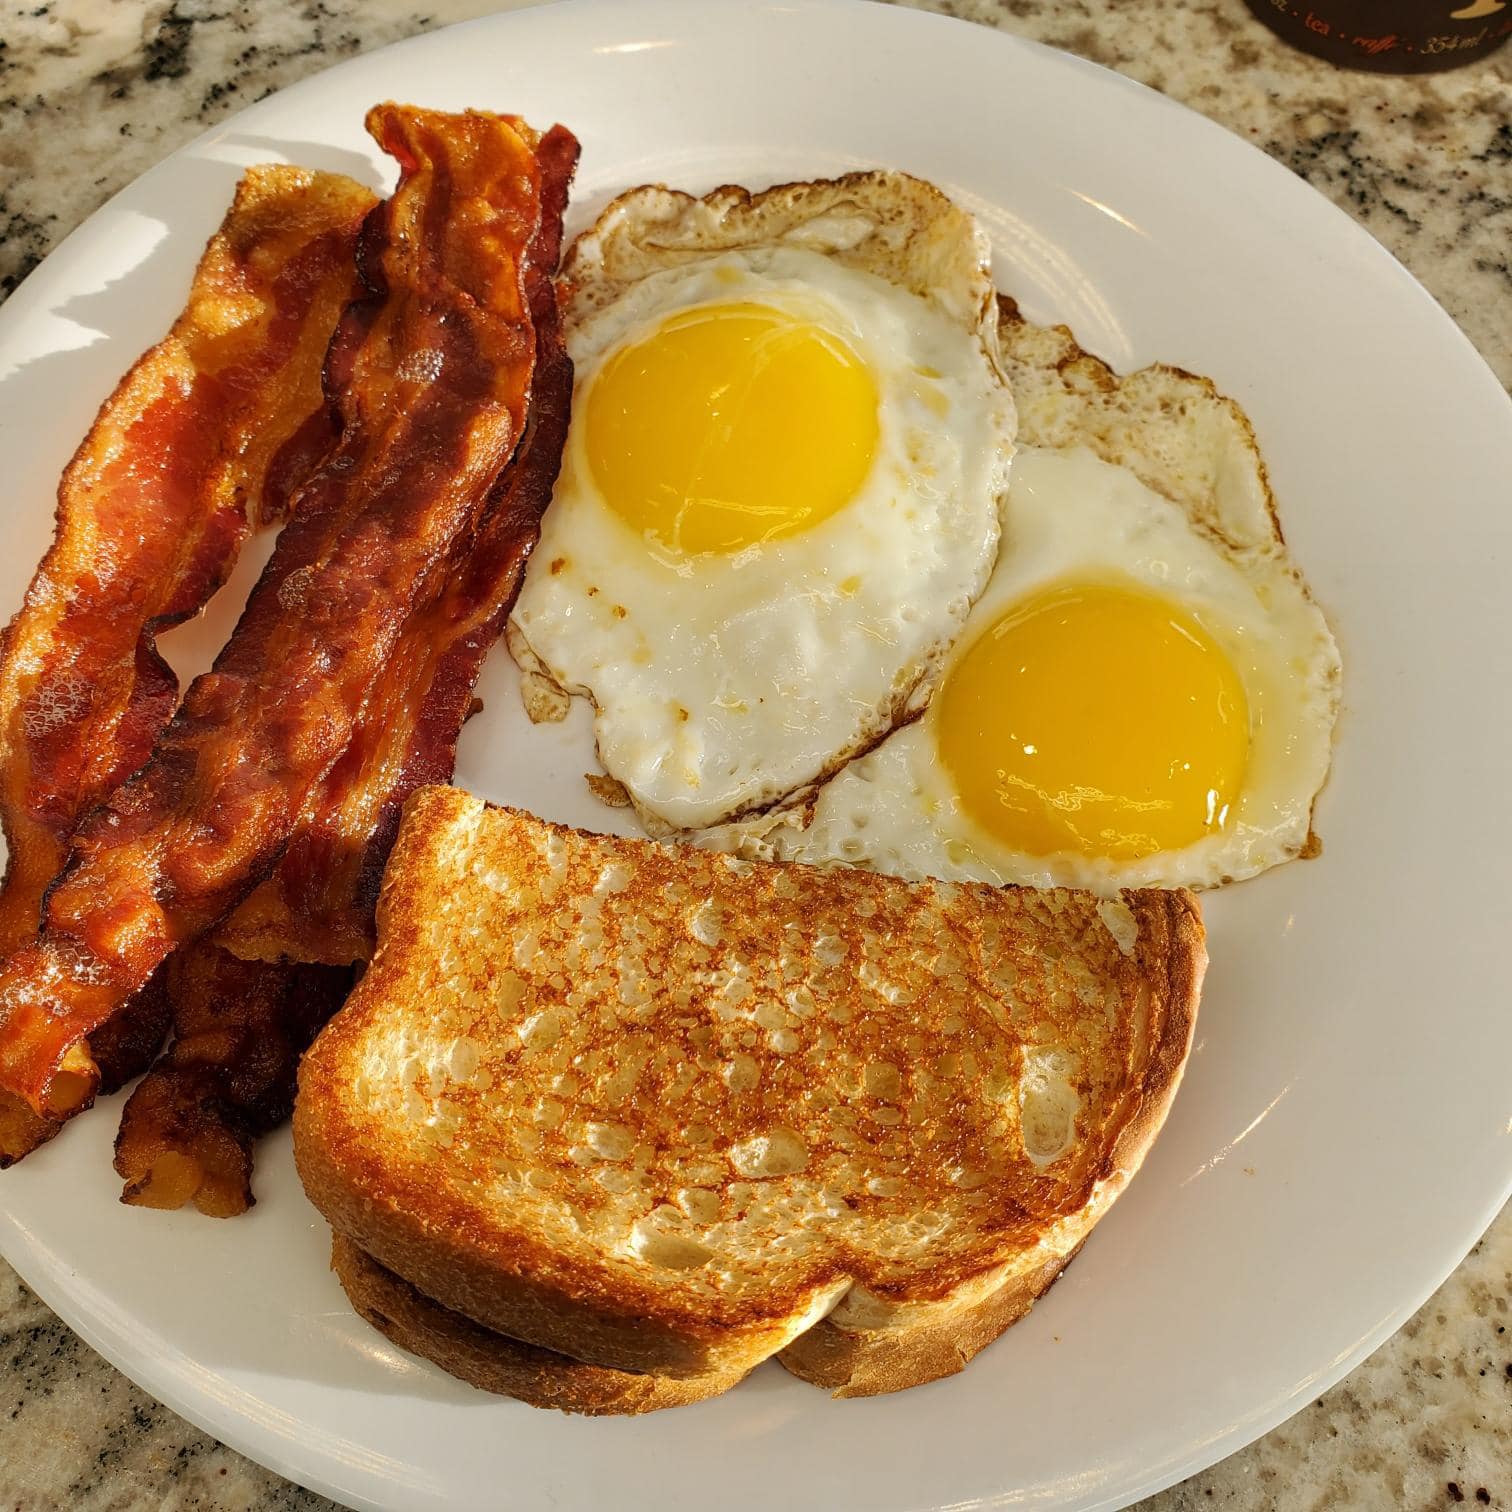 Bacon, Eggs, and Toast